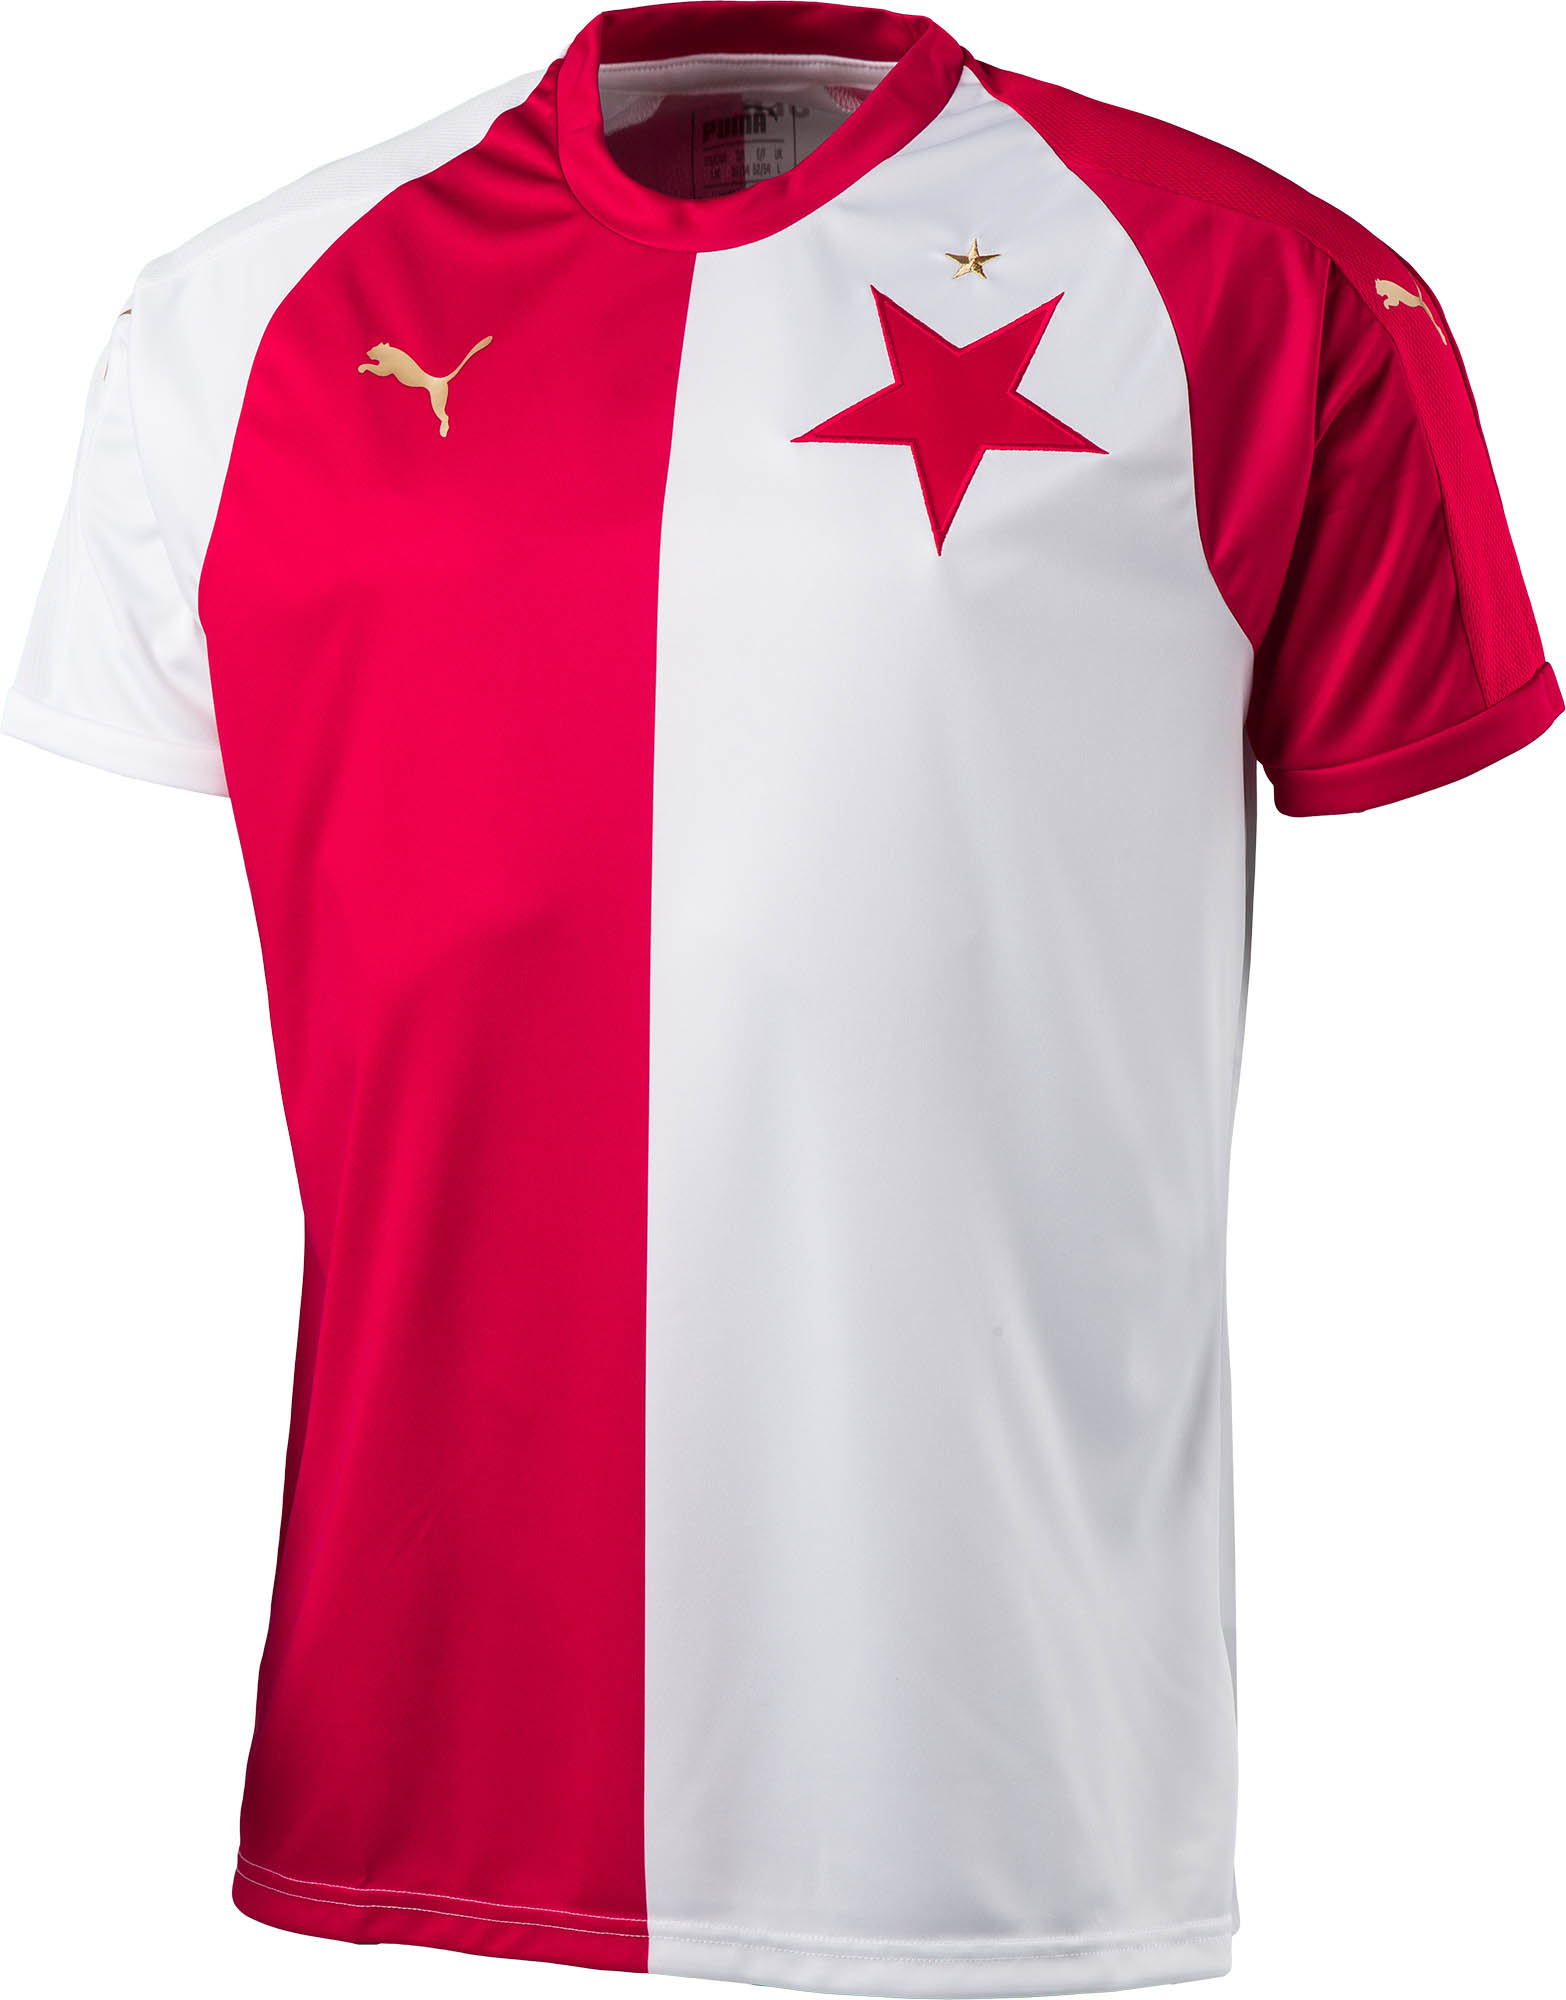 Football cup jersey